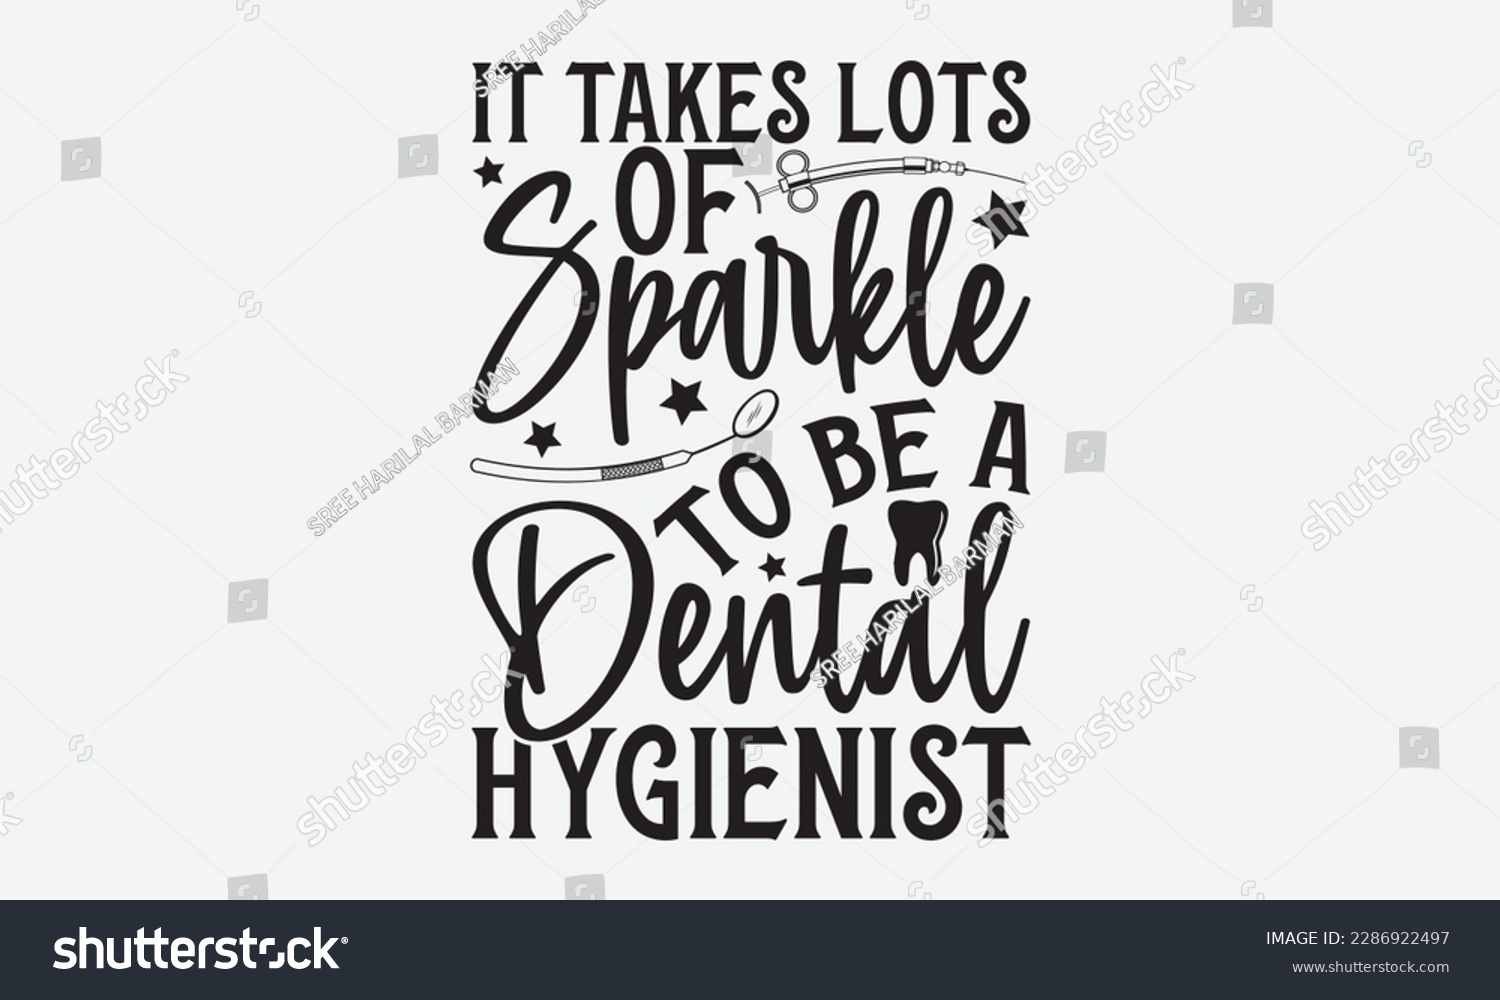 SVG of It Takes Lots Of Sparkle To Be A Dental Hygienist - Dentist T-shirt Design, Conceptual handwritten phrase craft SVG hand-lettered, Handmade calligraphy vector illustration, template, greeting cards, m svg